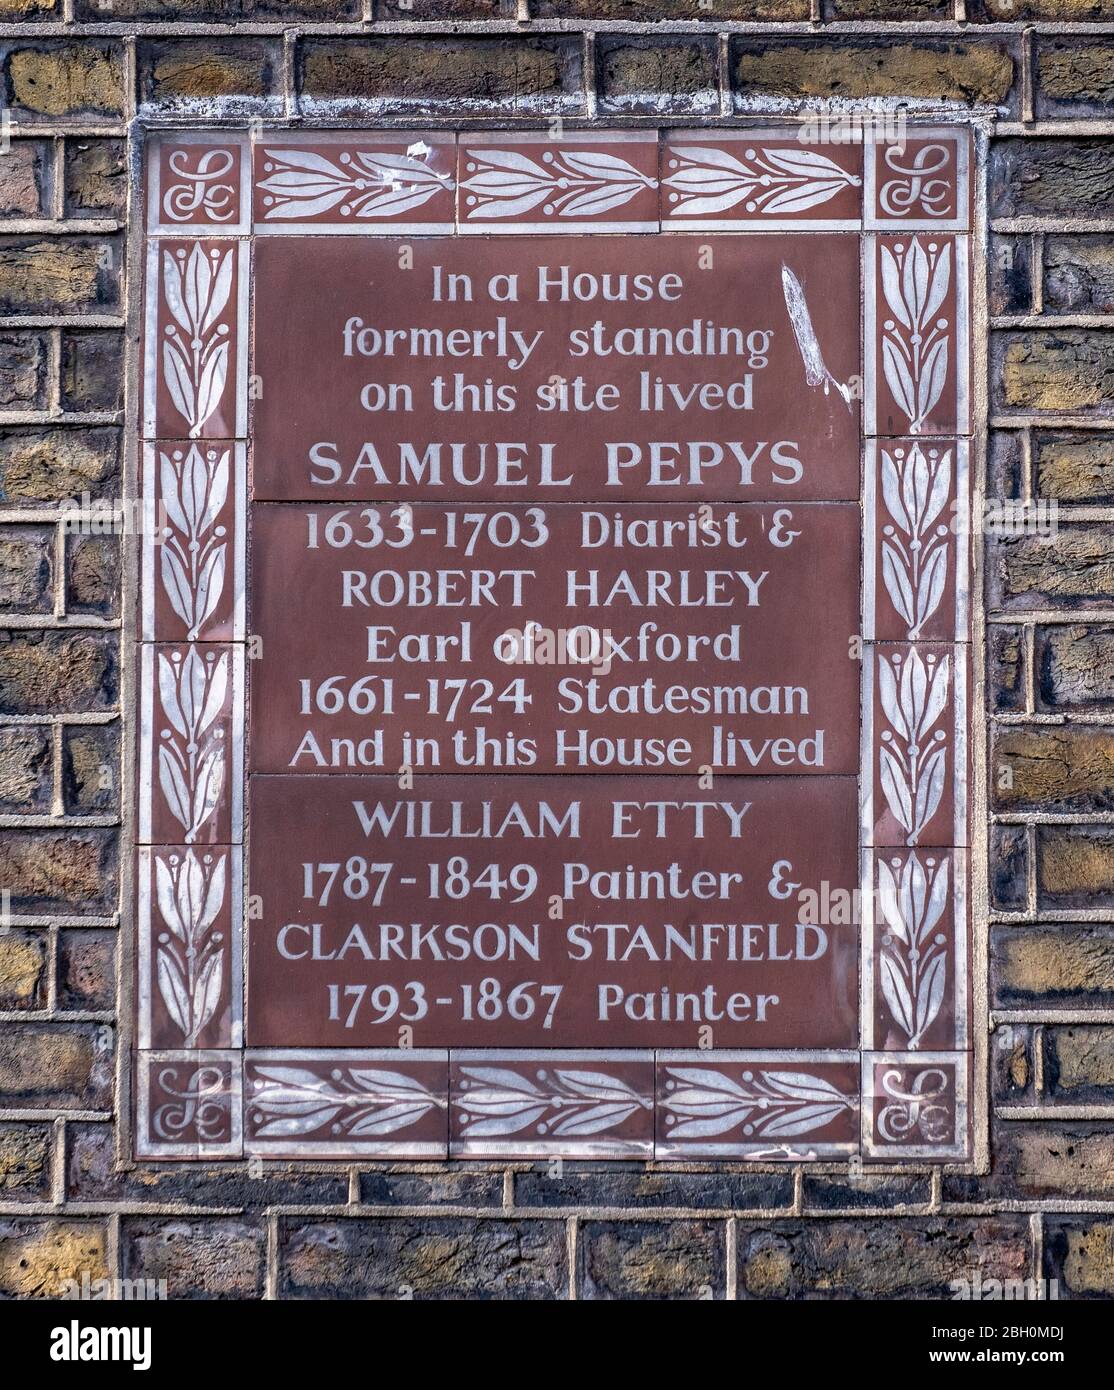 Commemorative plaque in Buckingham Street, near Charing Cross in London, to Samuel Pepys, Robert Harley and Wellam Etty who lived in a house Stock Photo